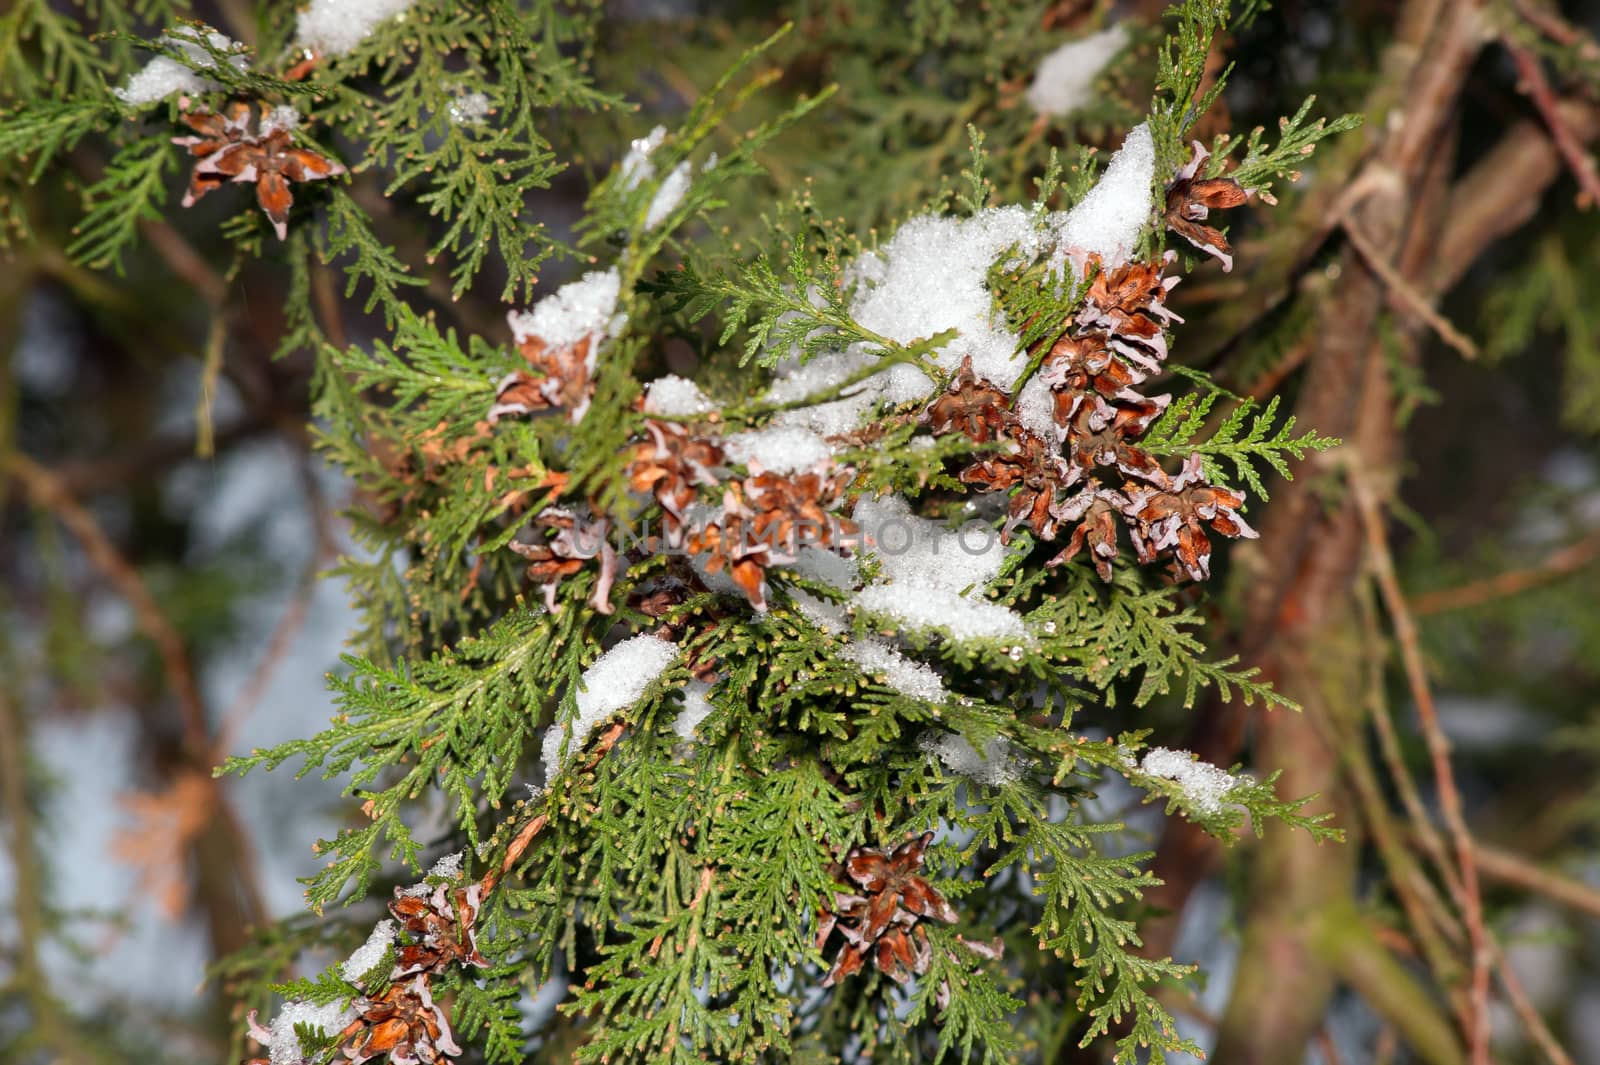 In winter, the seeds of snow-covered thuja